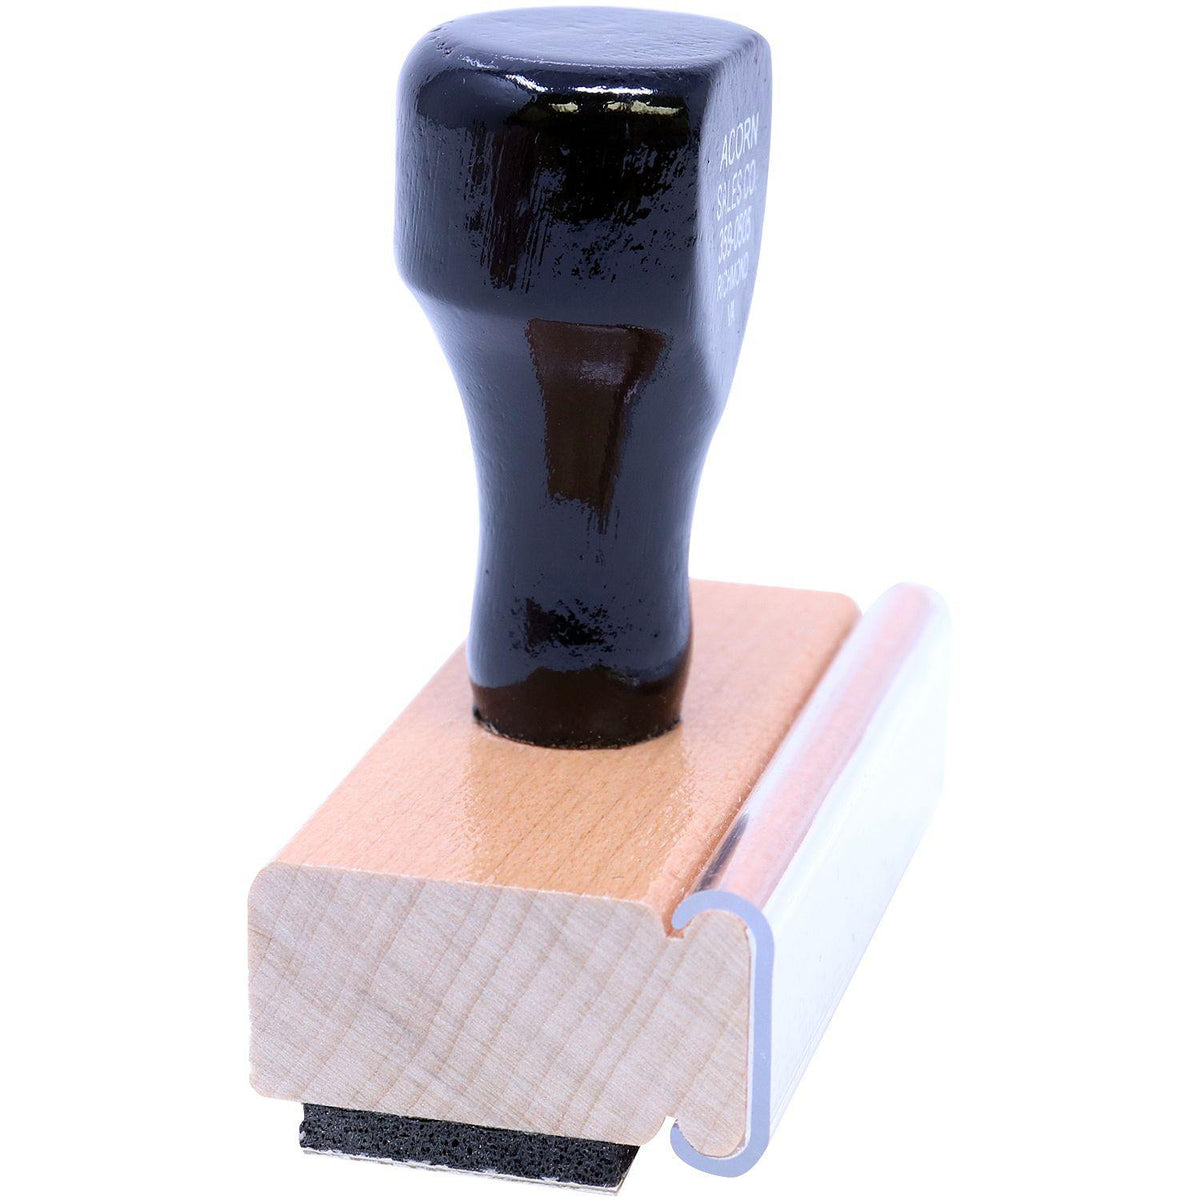 nCov Rubber Stamp - Engineer Seal Stamps - Brand_Acorn, Impression Size_Small, Stamp Type_Regular Stamp, Type of Use_Medical Office